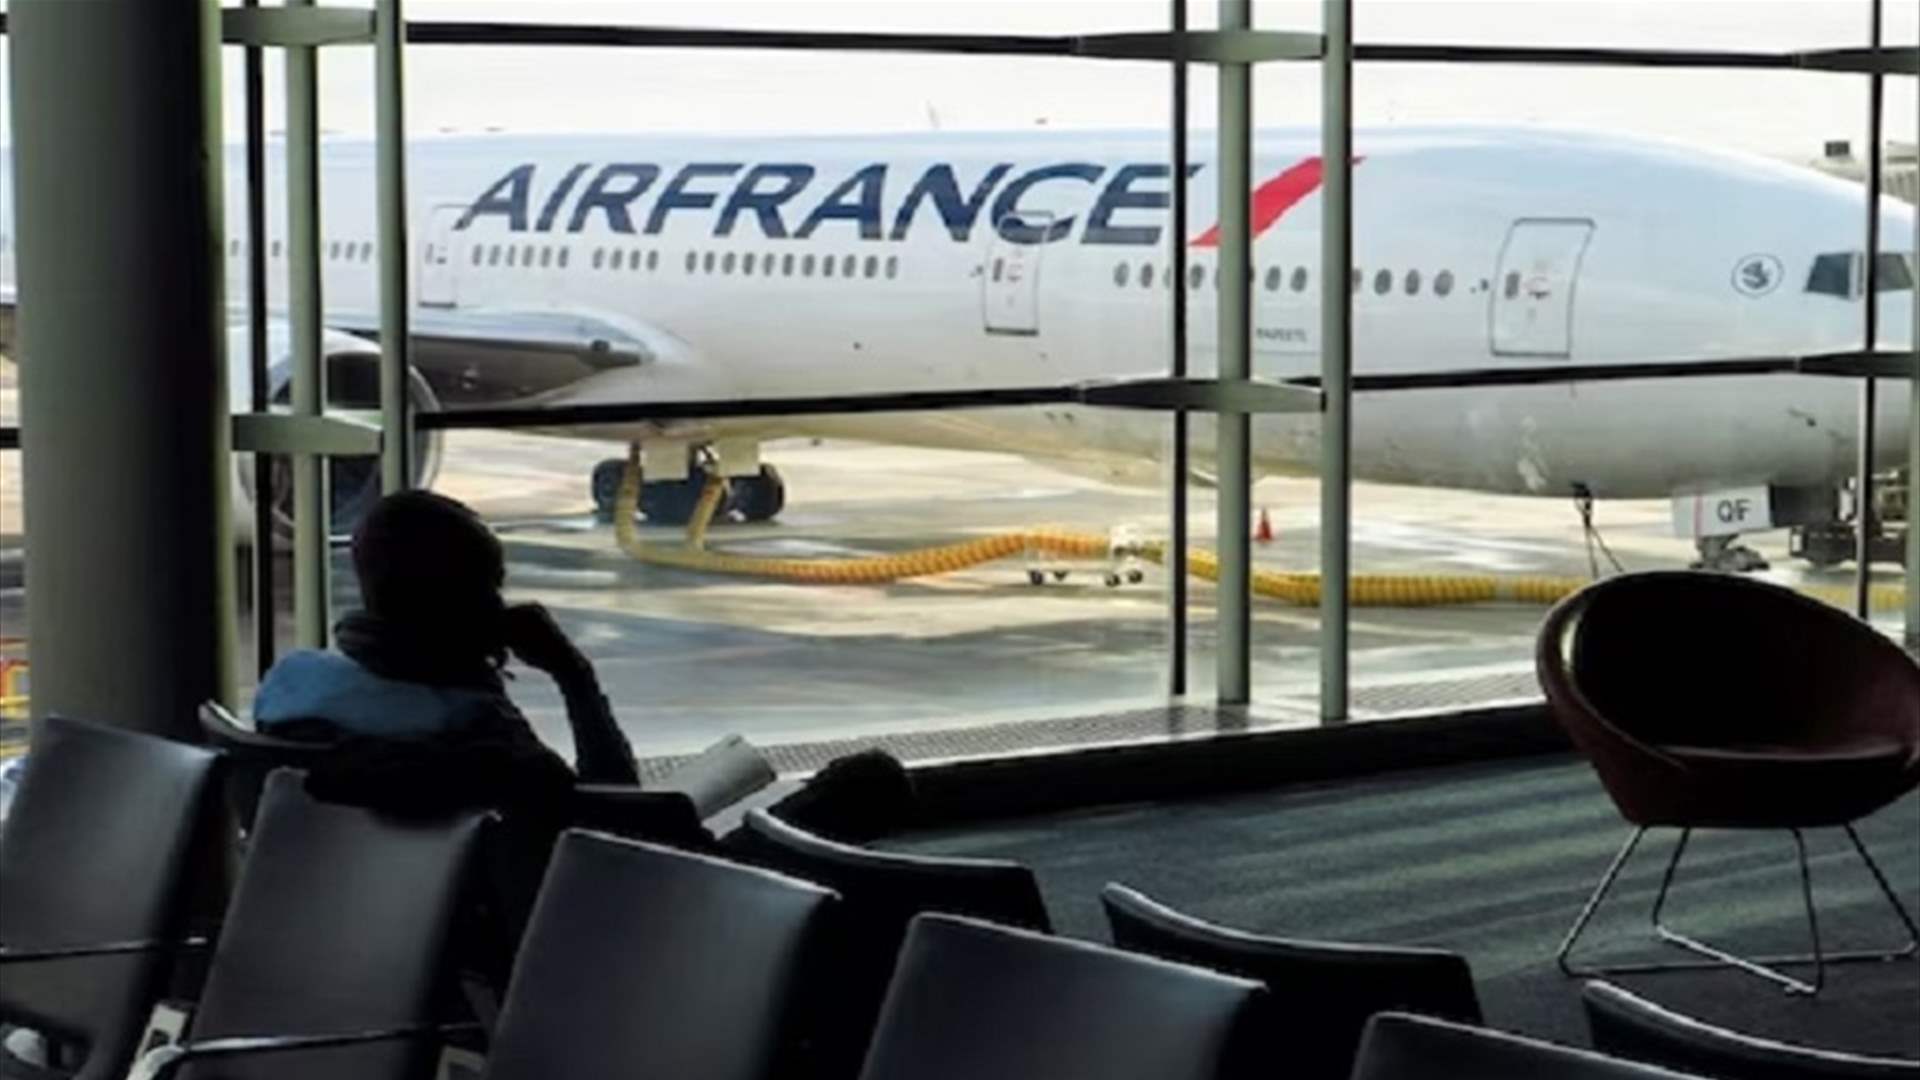 Bomb threats target 14 French airports, with the evacuation of three of them